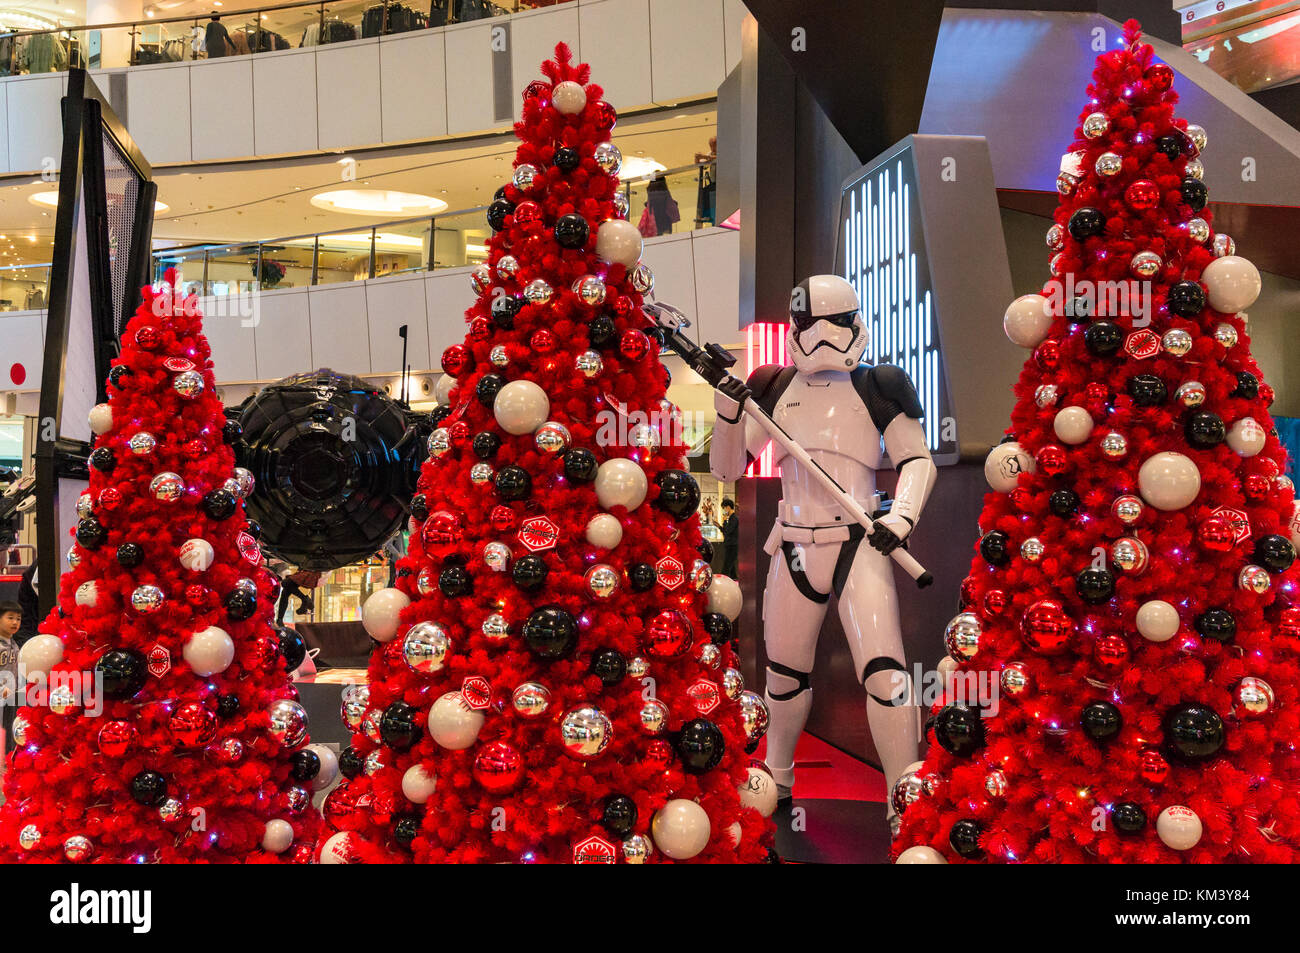 Star Wars theme Christmas with lifesize stormtrooper and red Christmas trees Stock Photo